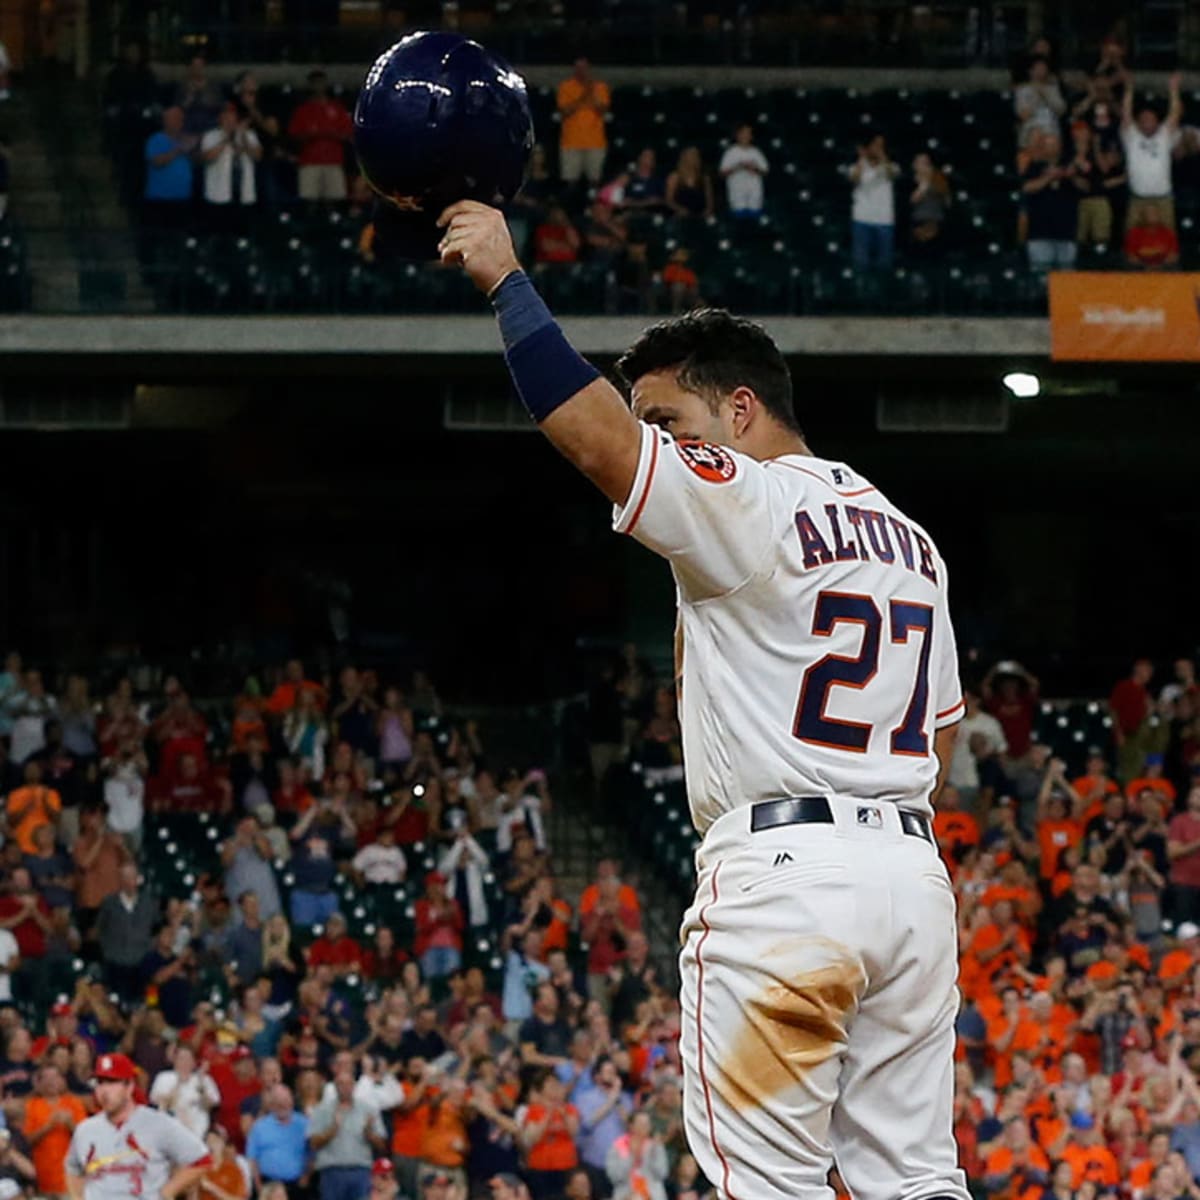 Jose Altuve reaches 1,000 career hits, but is 3,000 in reach